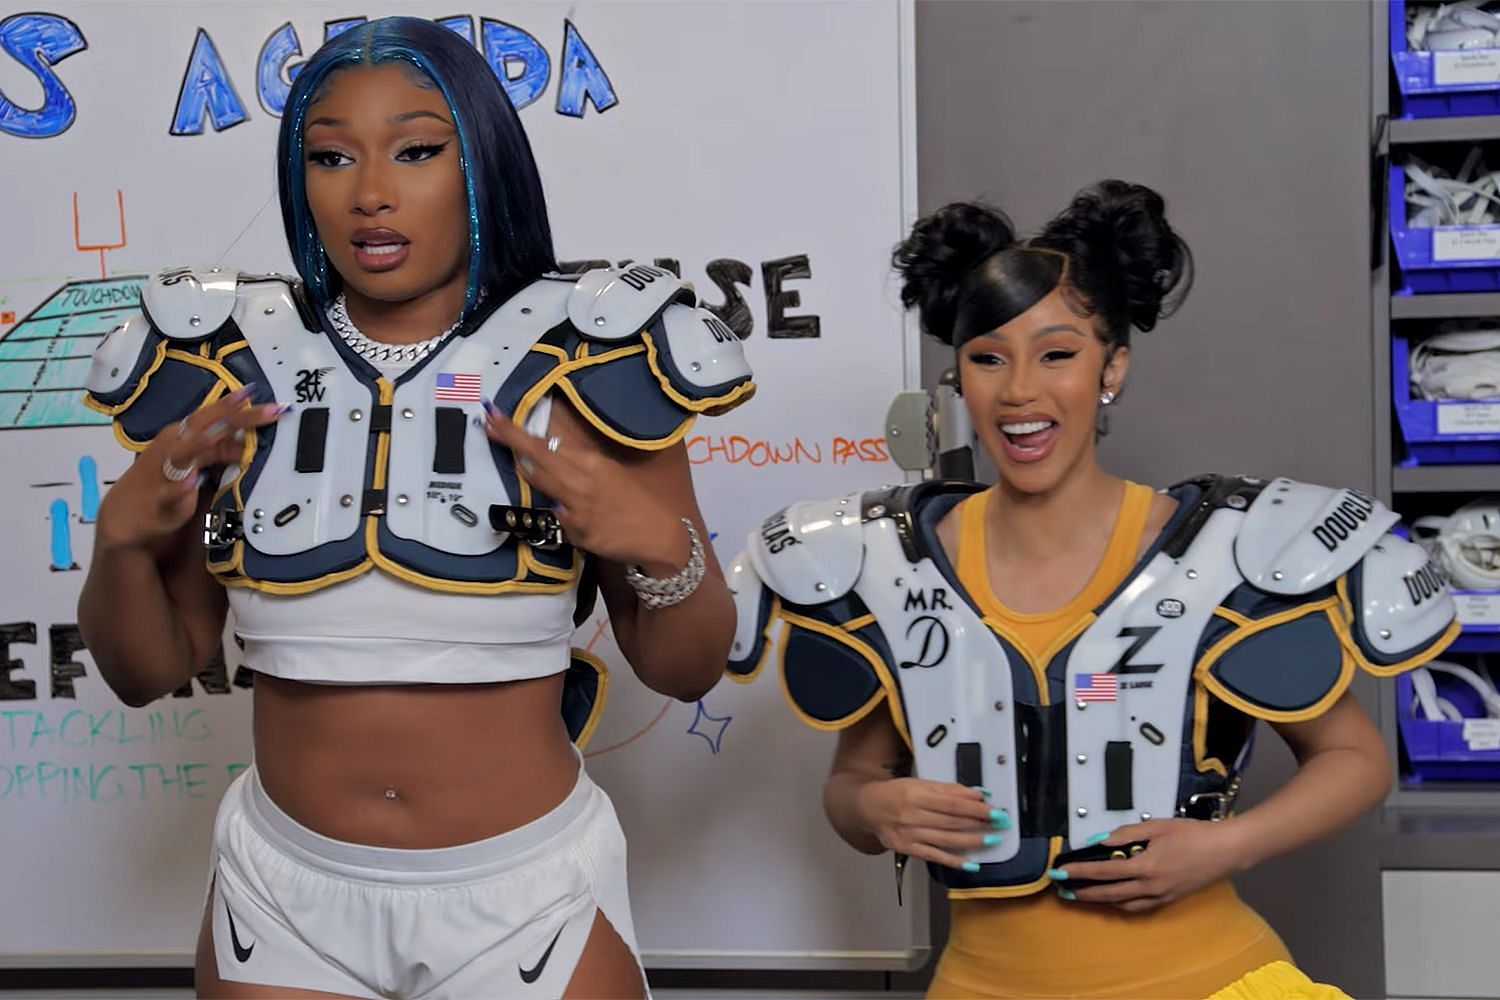 Cardi and Megan suited up to play on the Chargers practice facility. Source: Cardi Tries